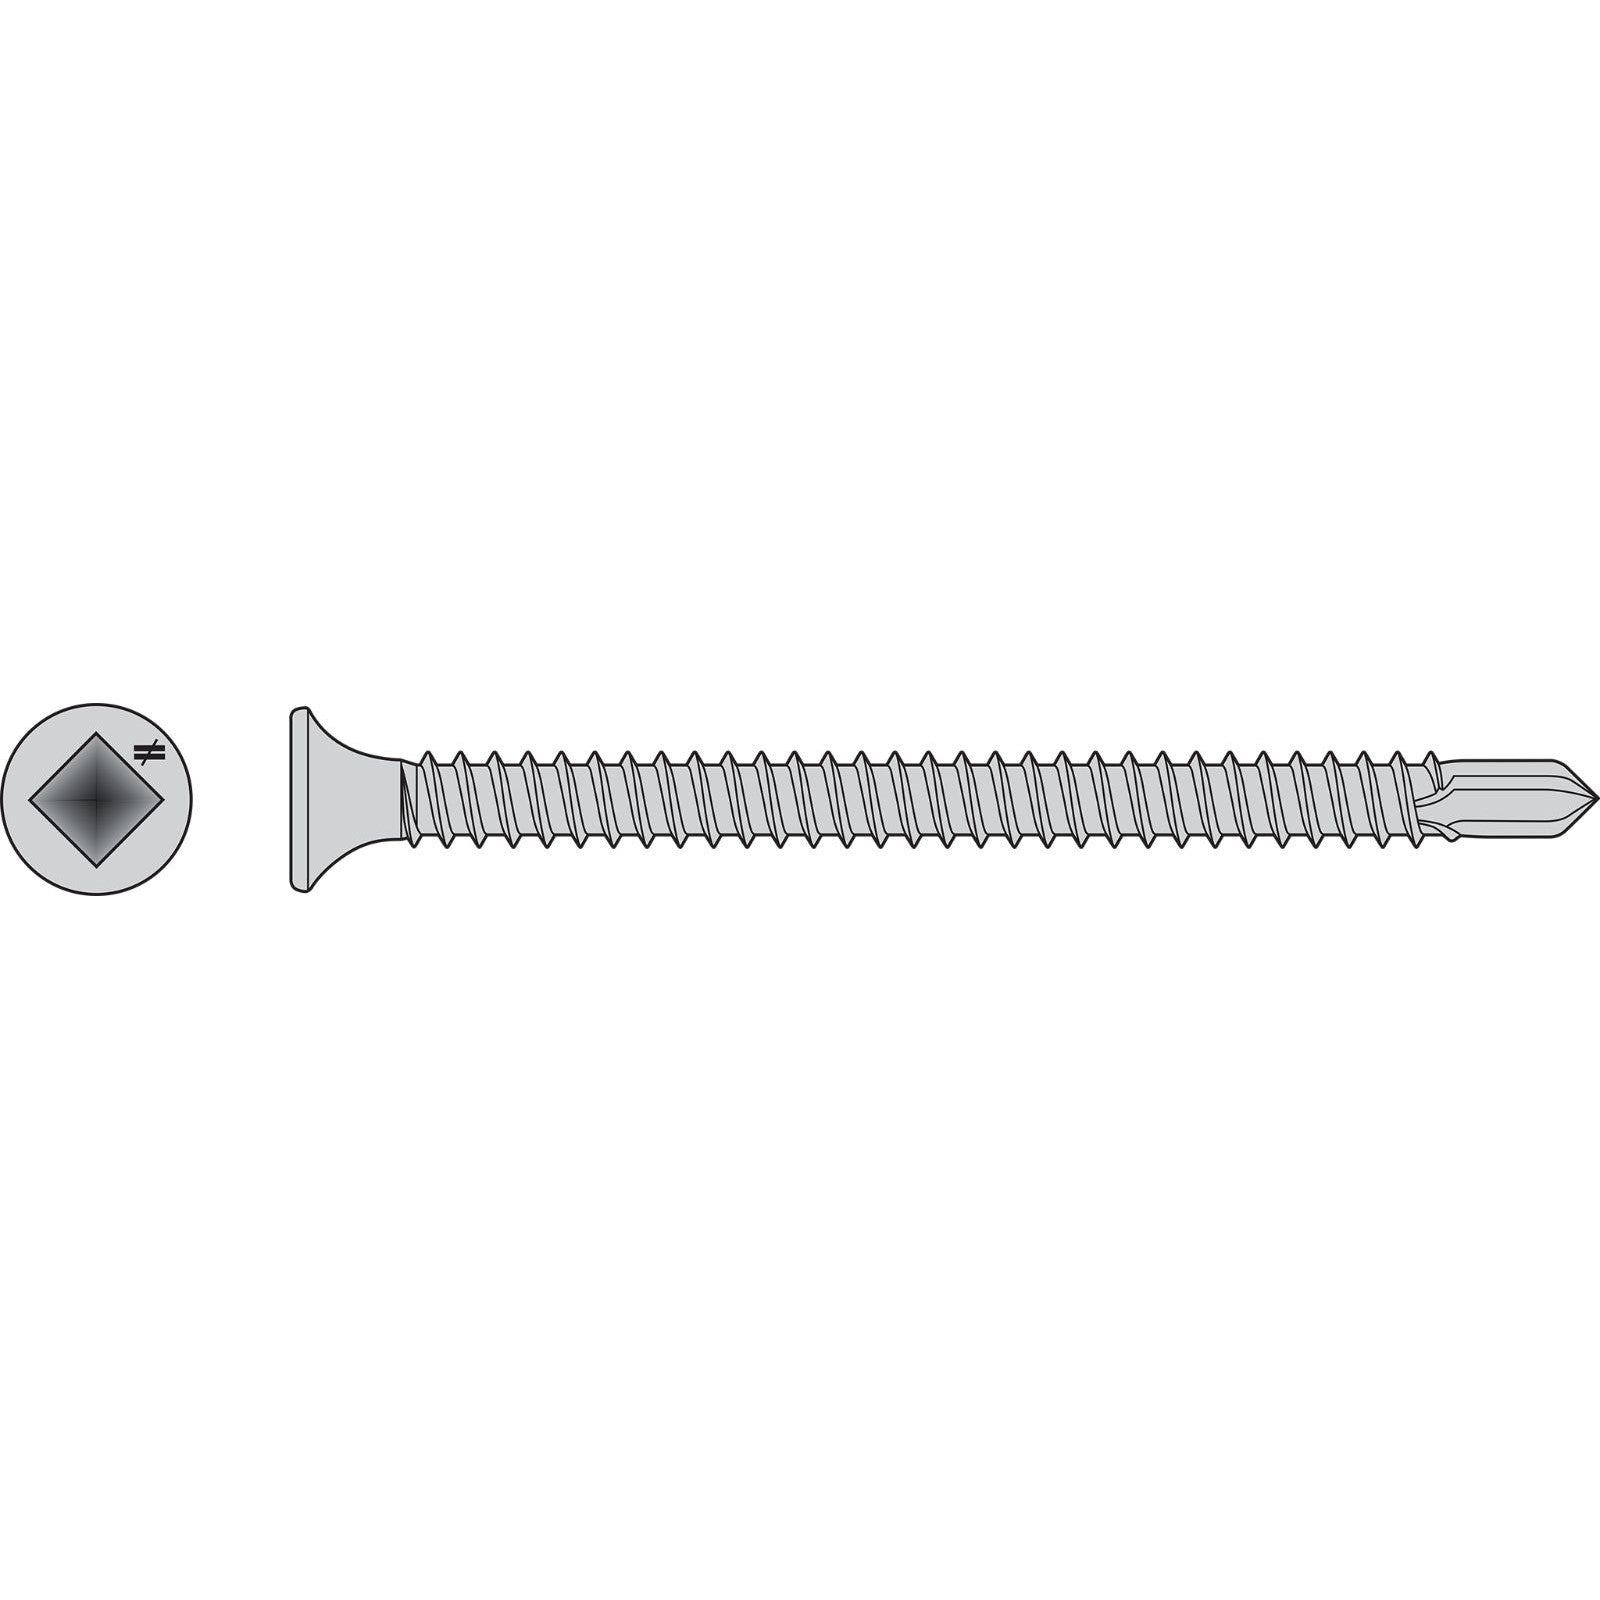 #10 x 212 inch Square Drive SelfDrilling BugleHead Screw 410 Stainless Steel Pkg 2000